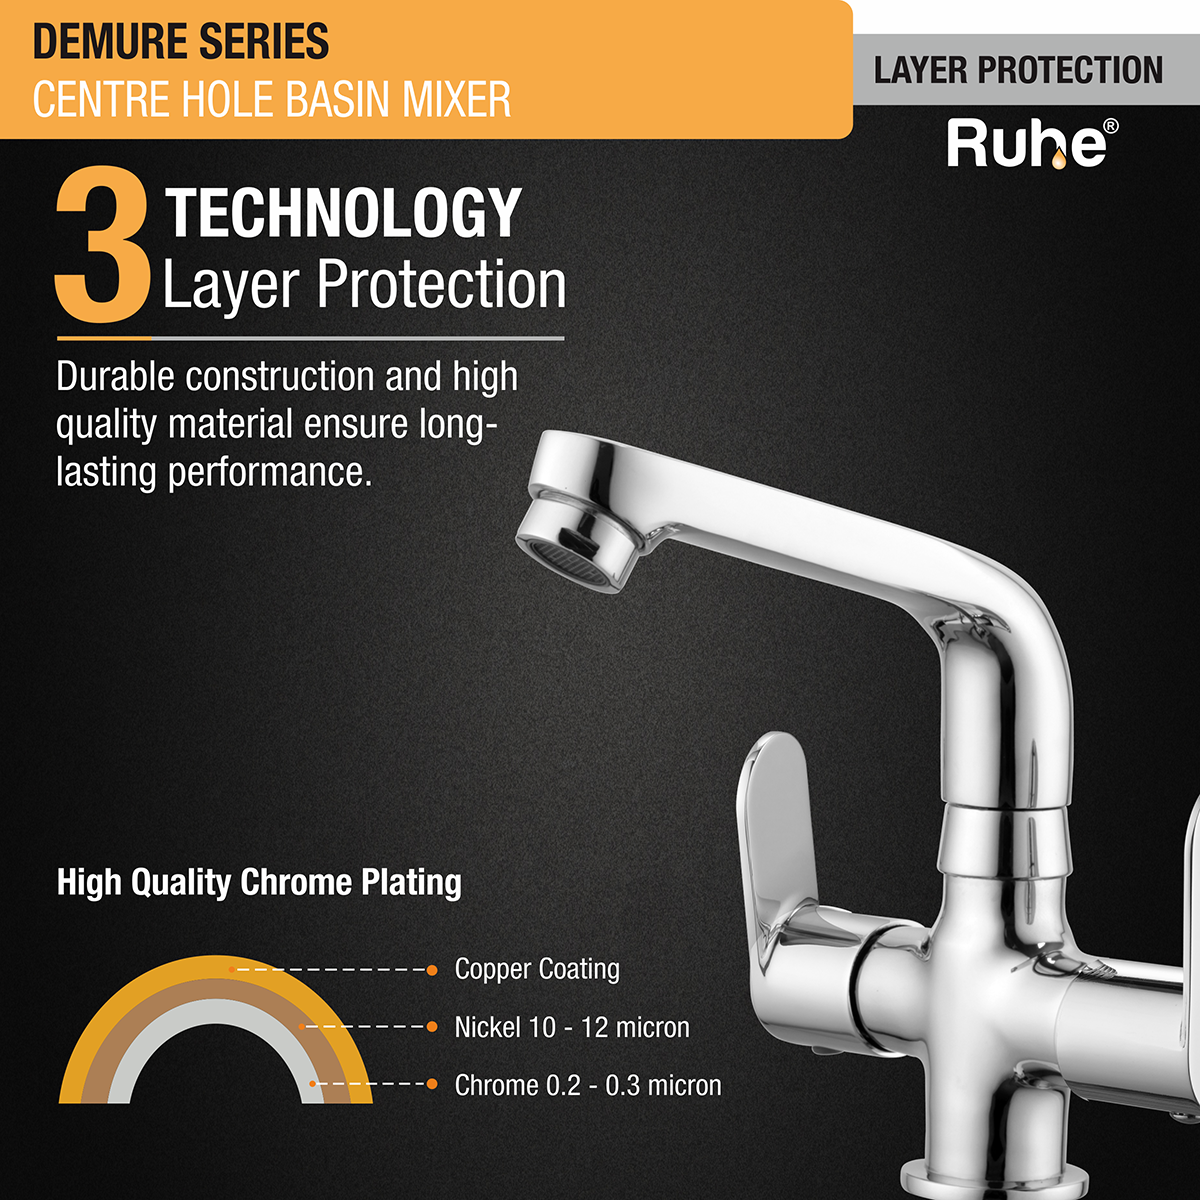 Demure Centre Hole Basin Mixer Brass Faucet with Small (7 inches) Swivel Spout - by Ruhe®